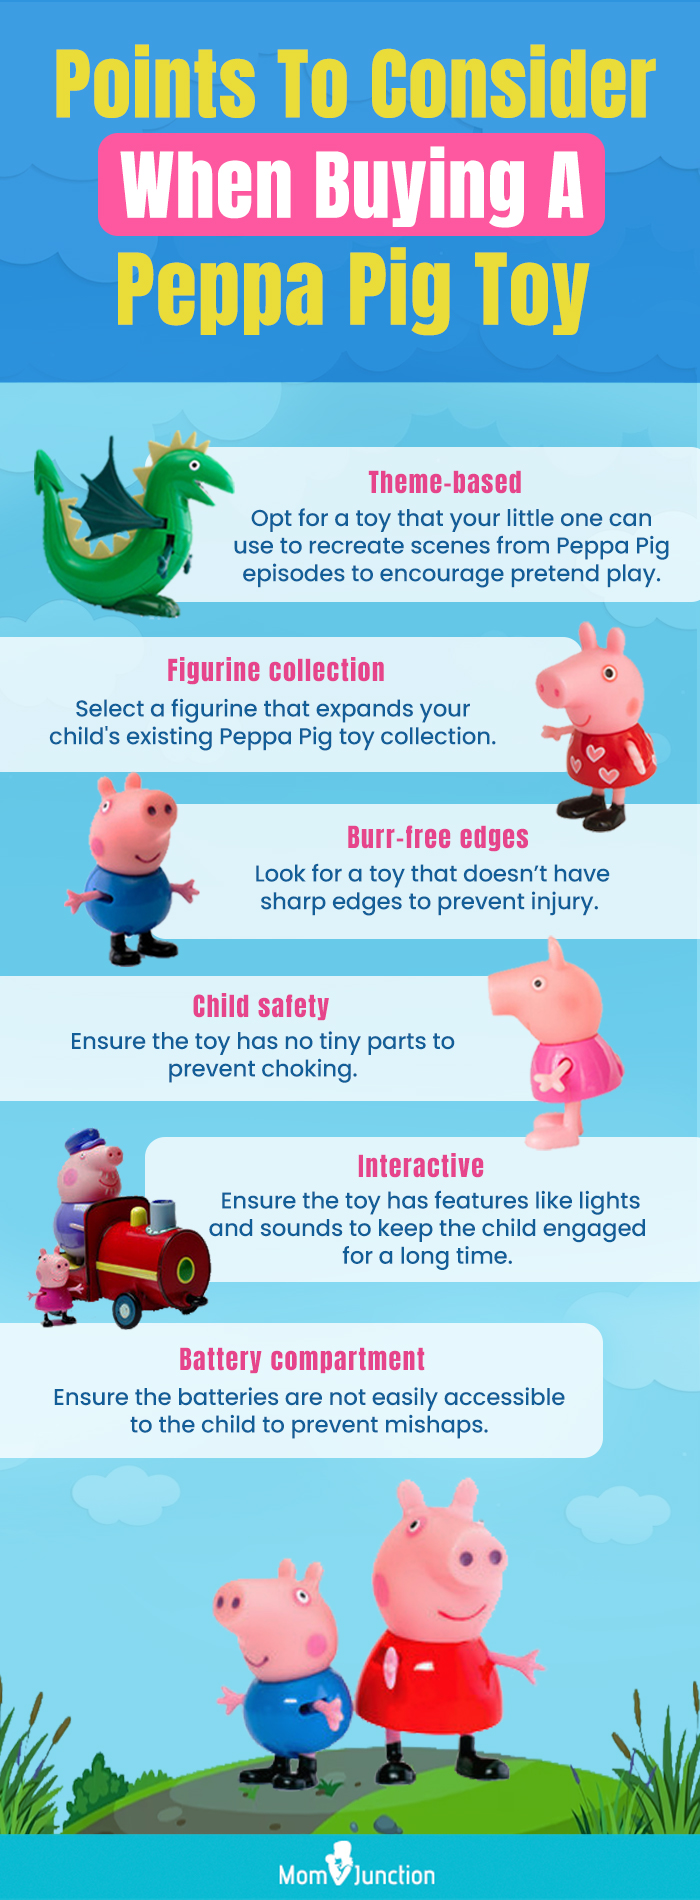 Peppa Pig Family Home Feature Playset w/ Lights, Sounds, & Accessories 